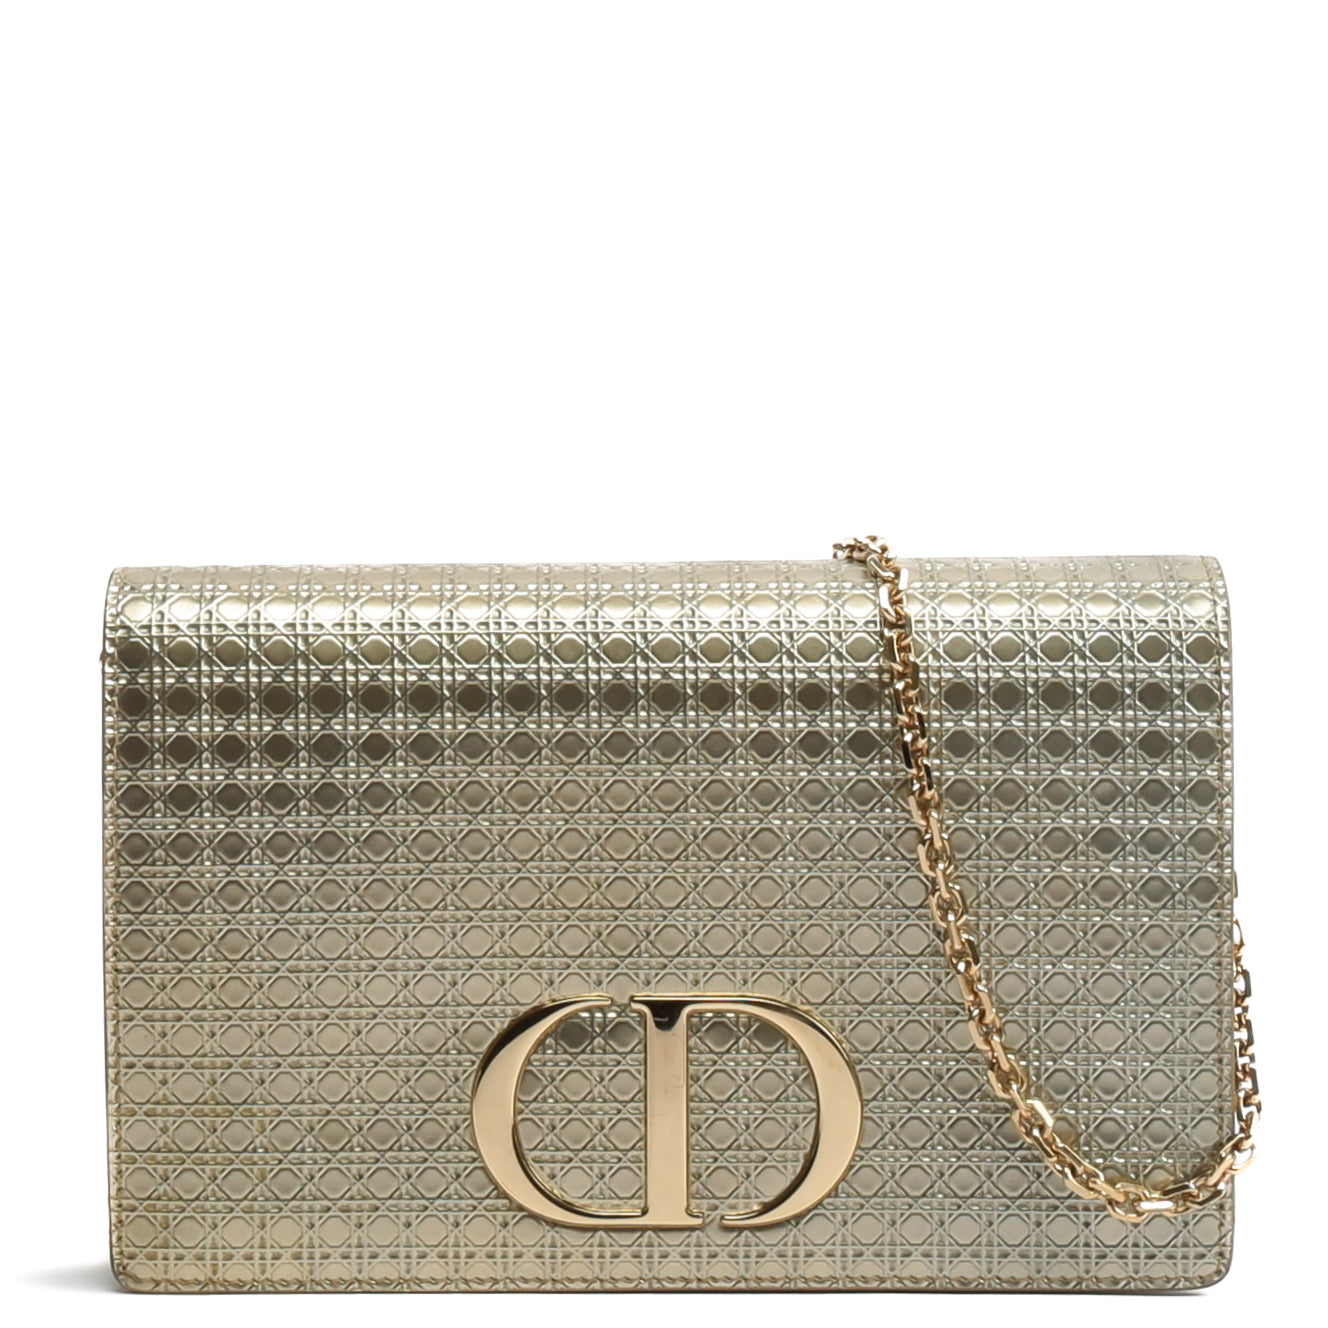 CHRISTIAN DIOR 30 Micro Cannage Montaigne 2 in 1 Pouch - Metallic Gold